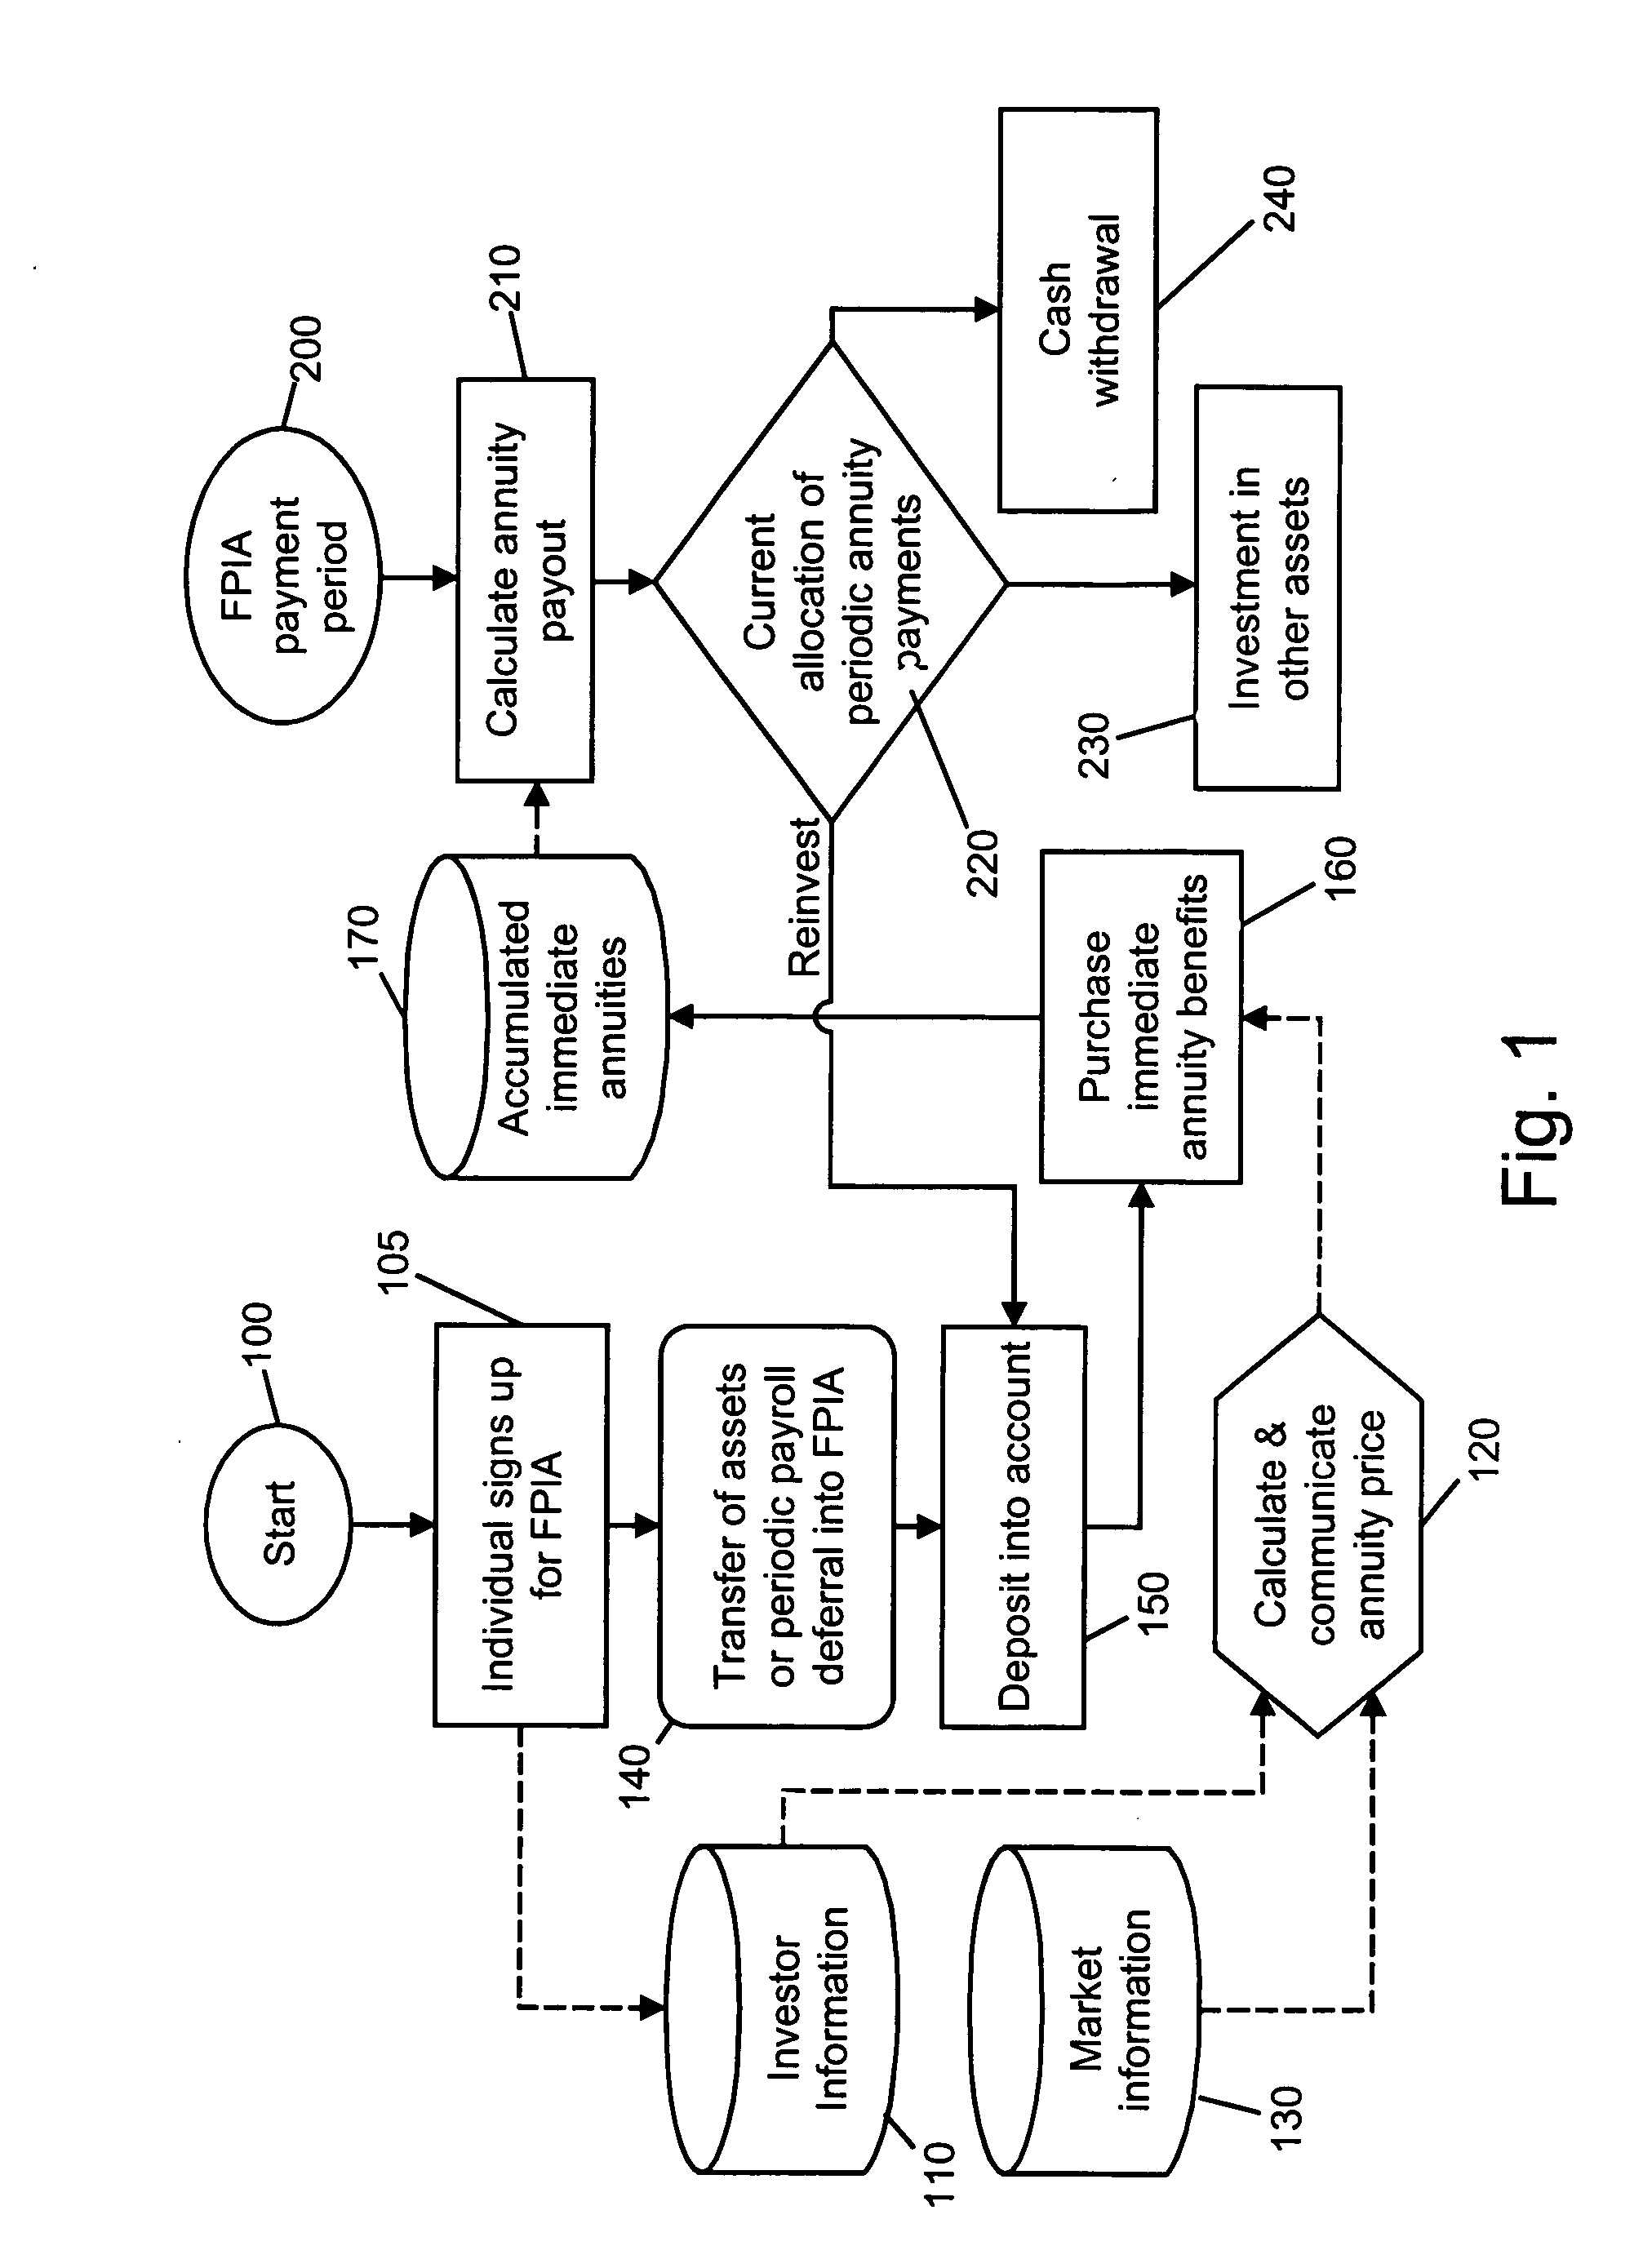 Methods for creating, issuing, managing and redeeming annuity-based retirement funding instruments